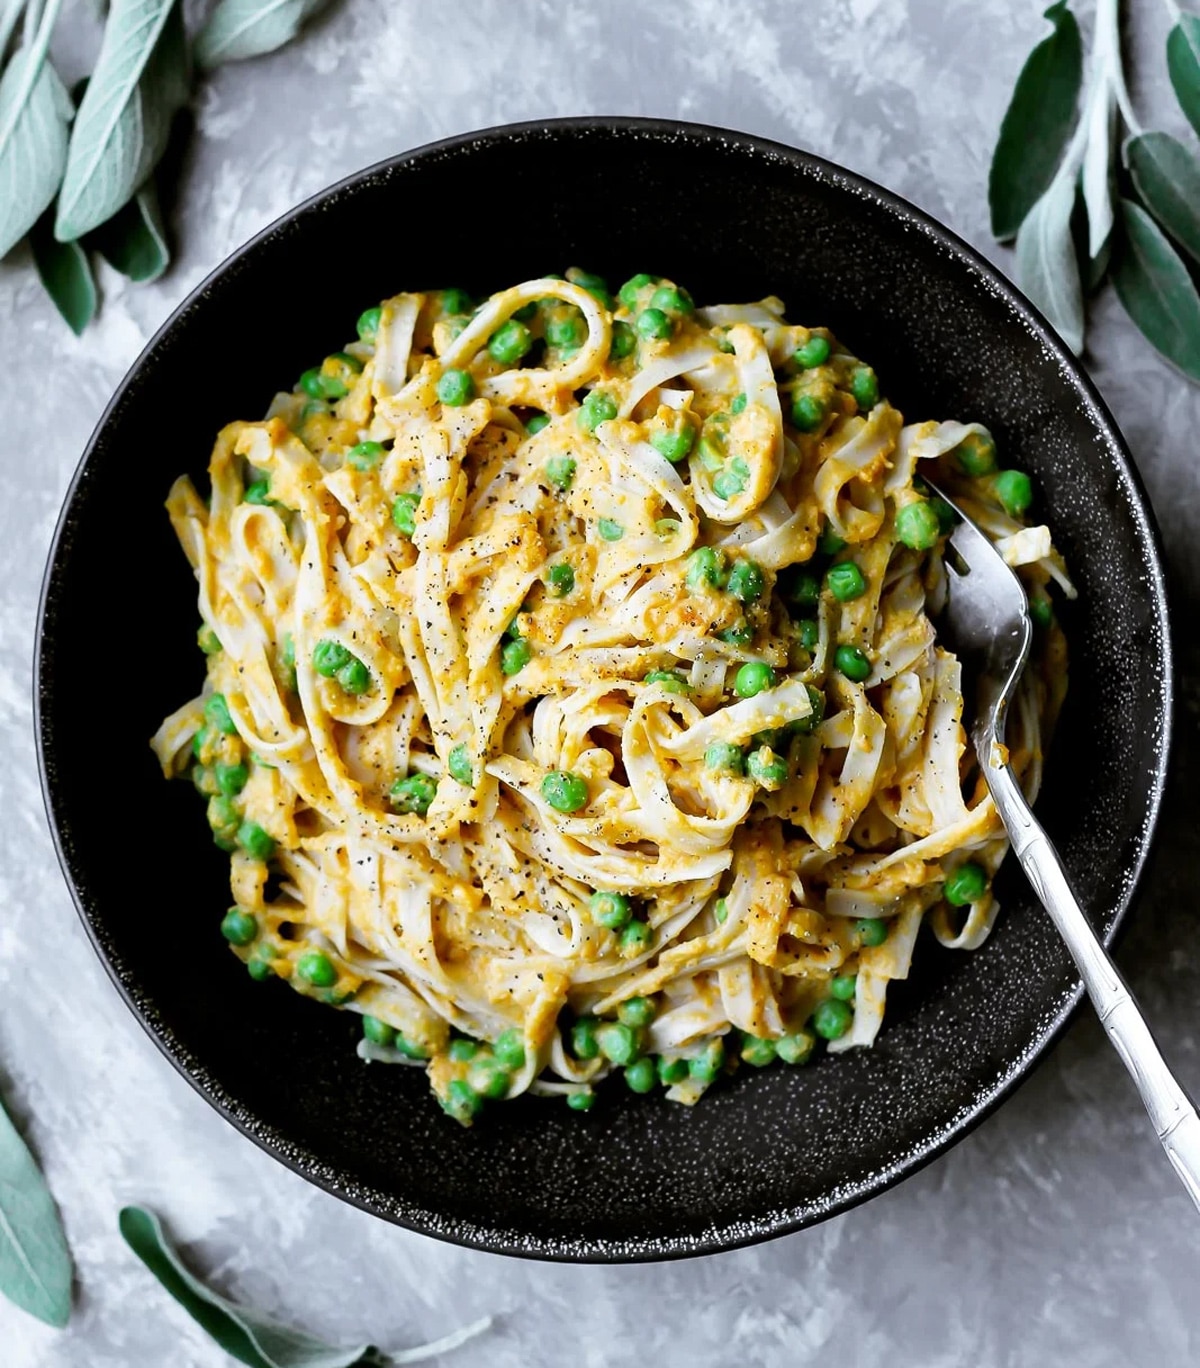 Creamy roasted butternut squash pasta with peas